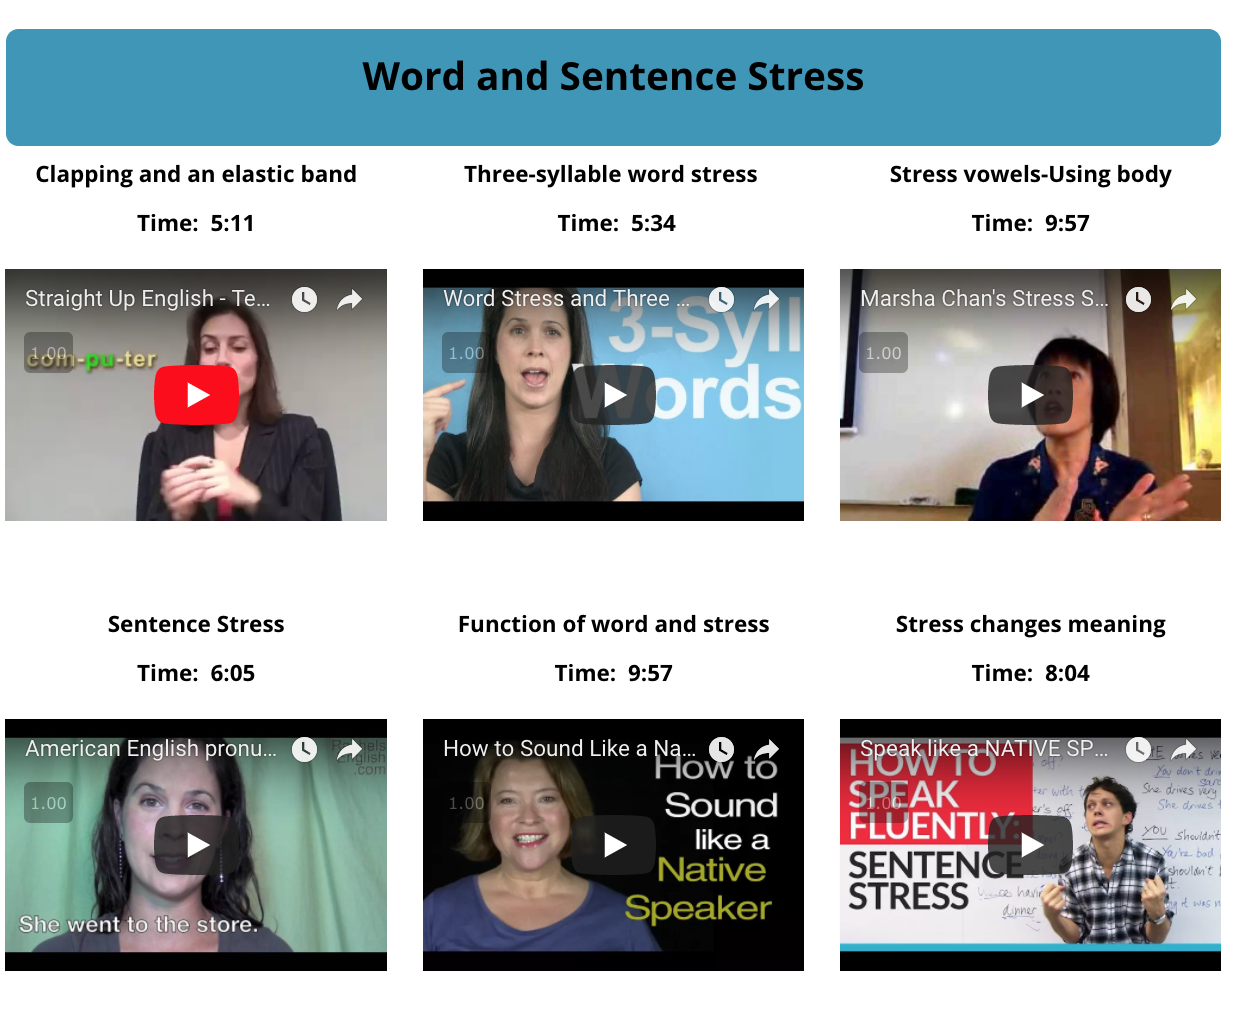 Figure 5. Video Content of the Word and Sentence Stress Button of the Suprasegmentals Page.